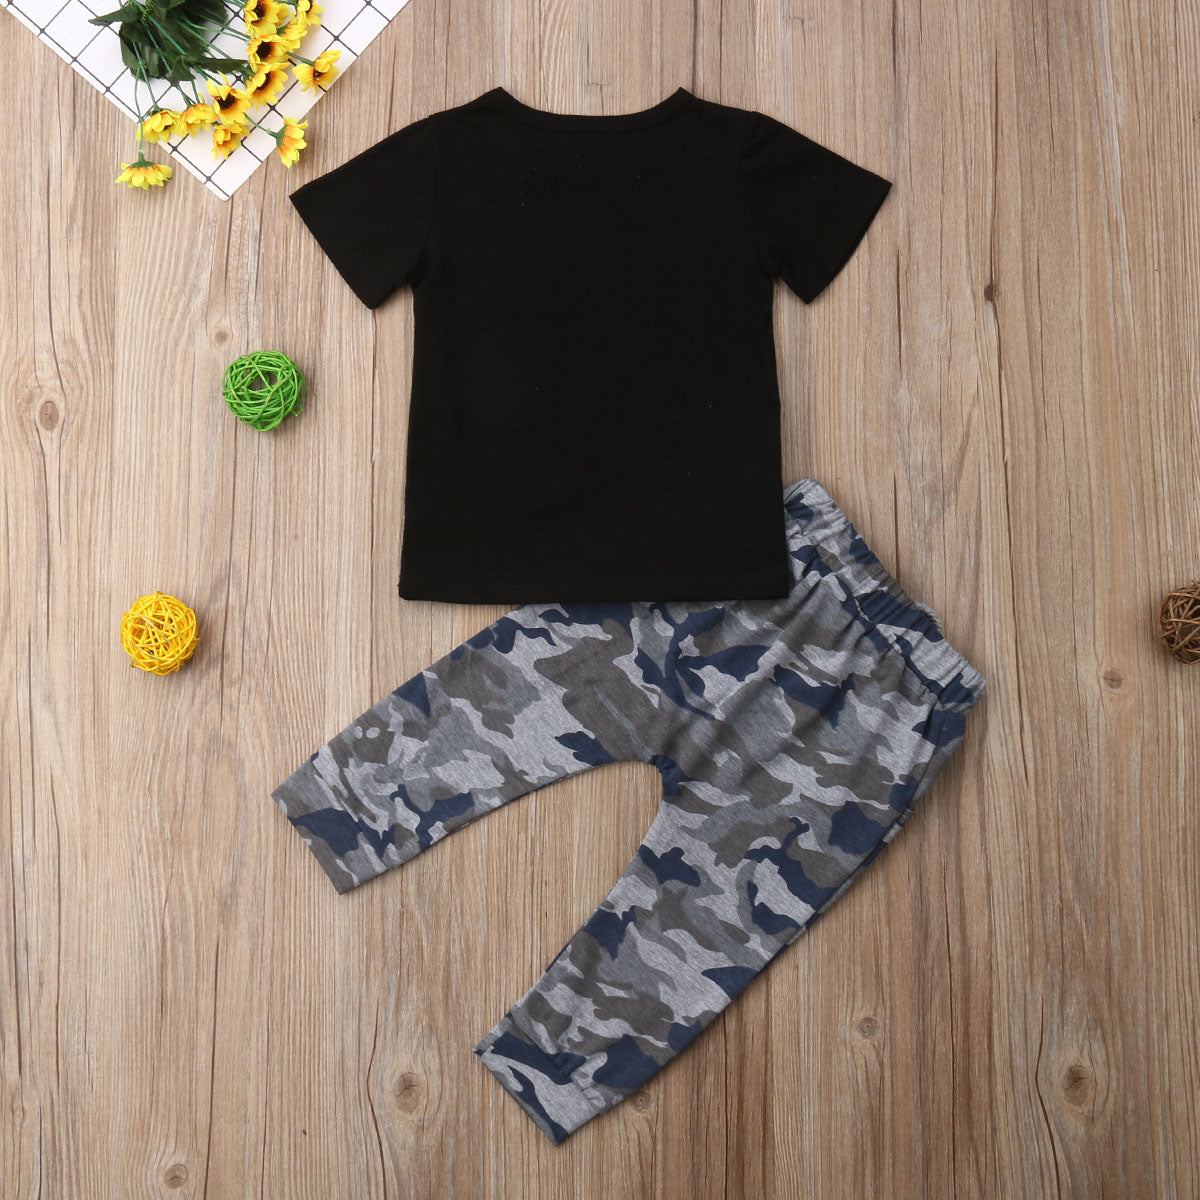 Mama's Little Soldier: Camo Print Toddler Boy Outfit Set for Summer Days